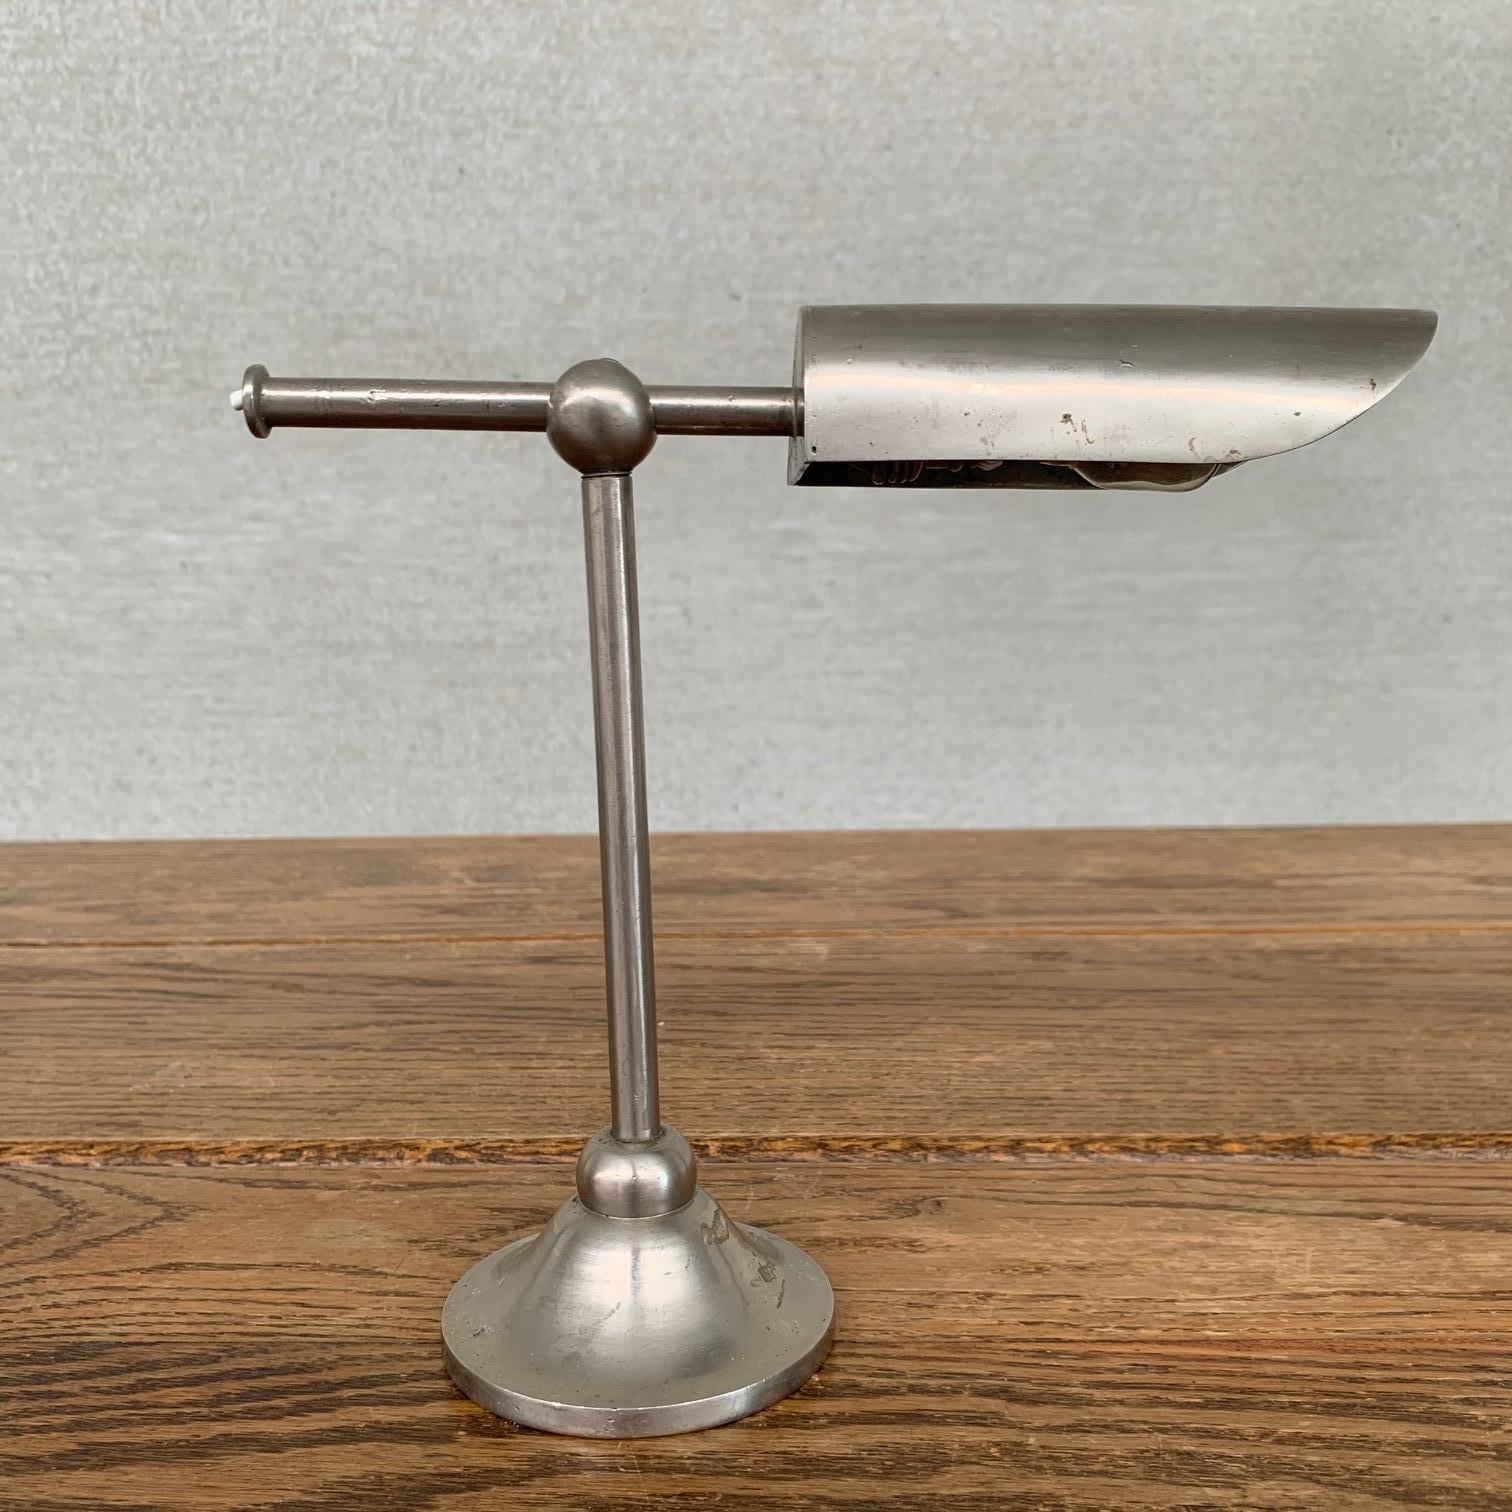 A stylish Directional and adjustable small desk lamp.

Holland, c1920s.

Heavy and good quality.

Since re-wired and PAT tested.

Location: Belgium Location

Dimensions: 23 W x 8.5 D x 20 H in cm.

Delivery: POA, We can ship around the